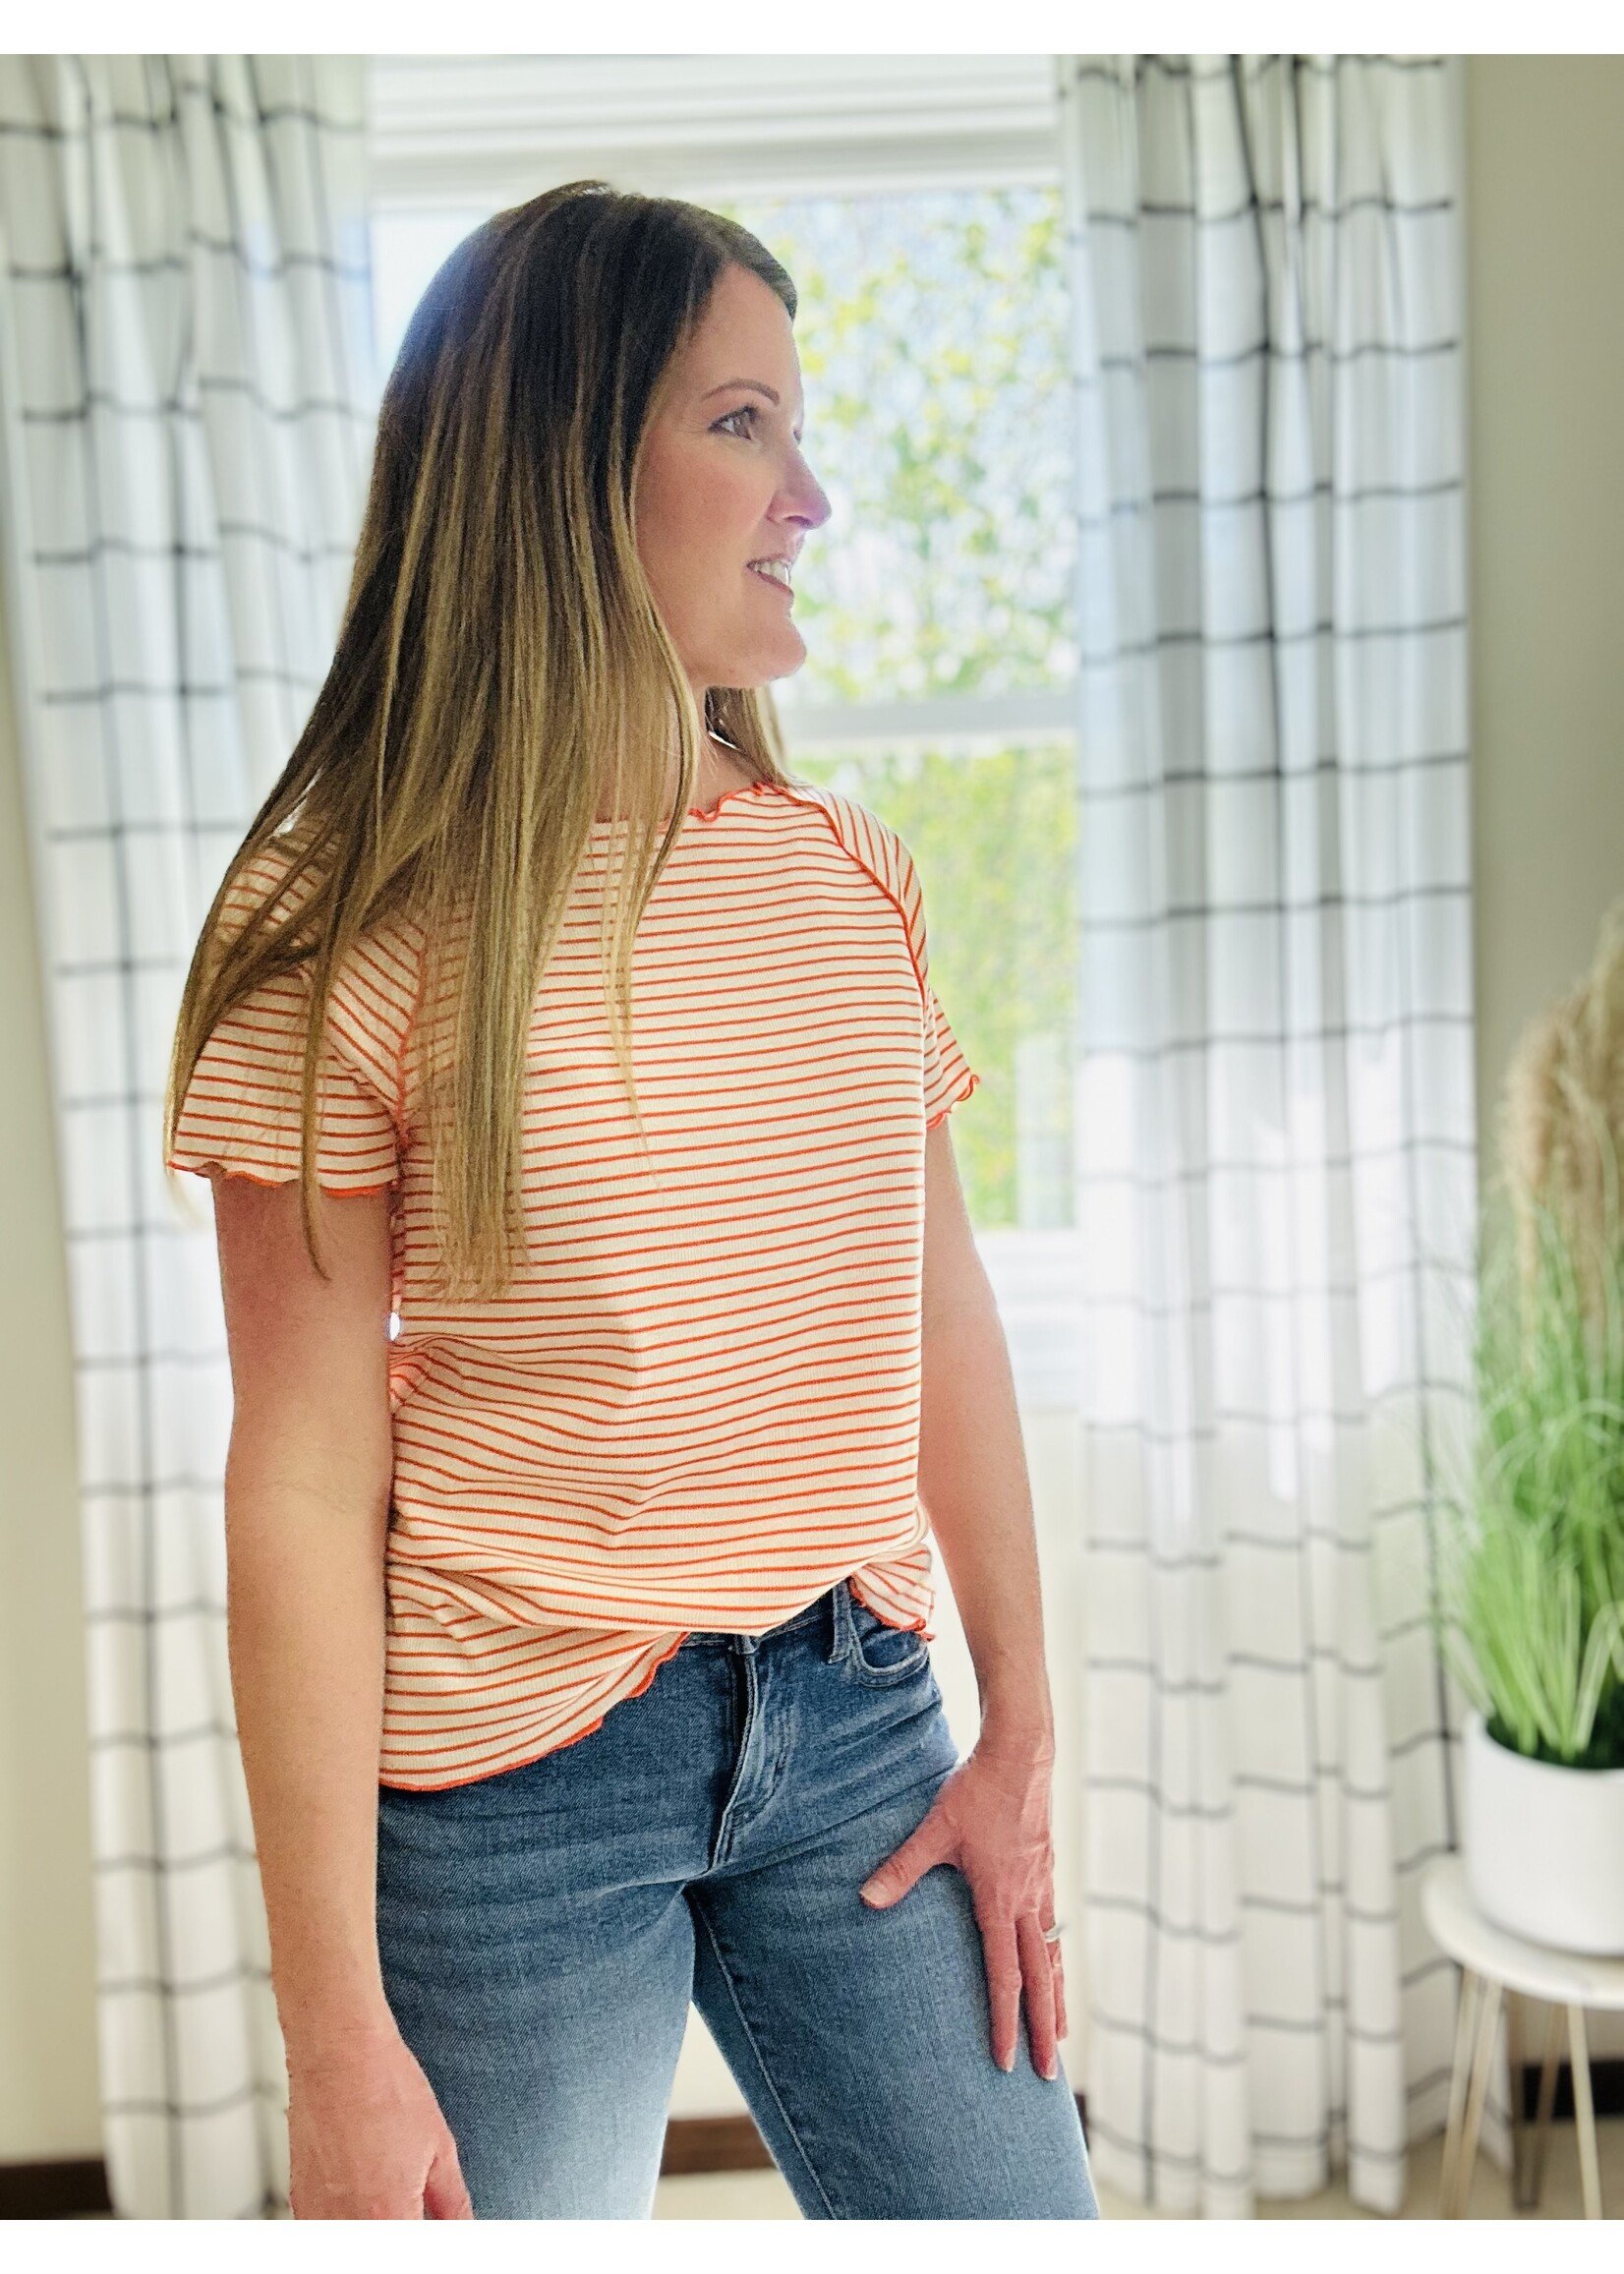 The Classic Striped Top